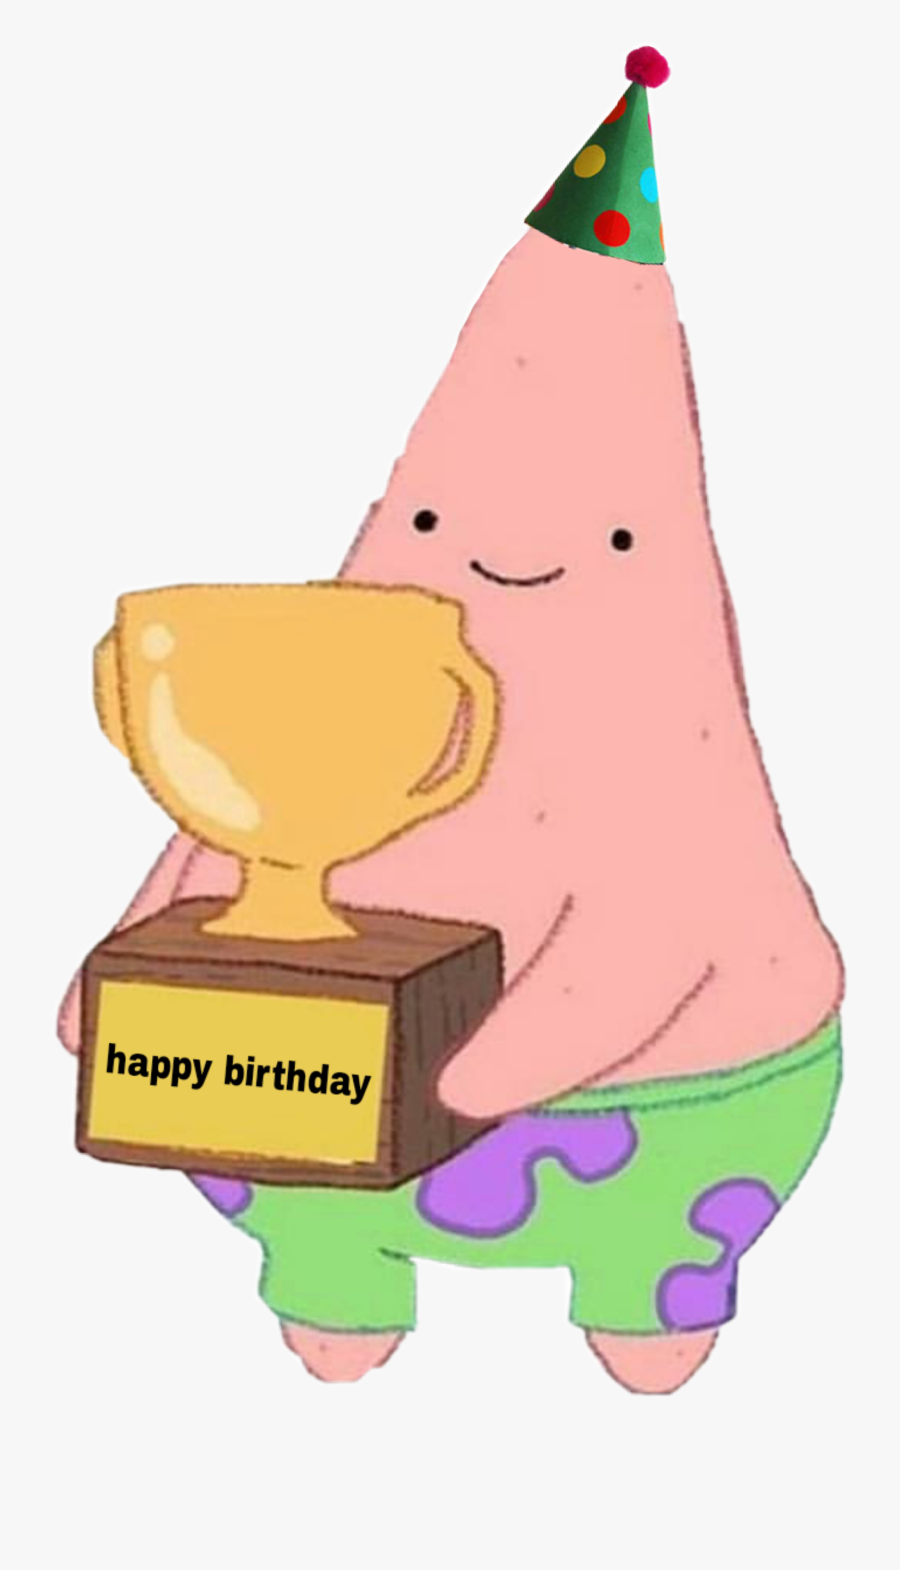 Happy Birthday, From Derpy Patrick To You <3 - Derpy Patrick, Transparent Clipart